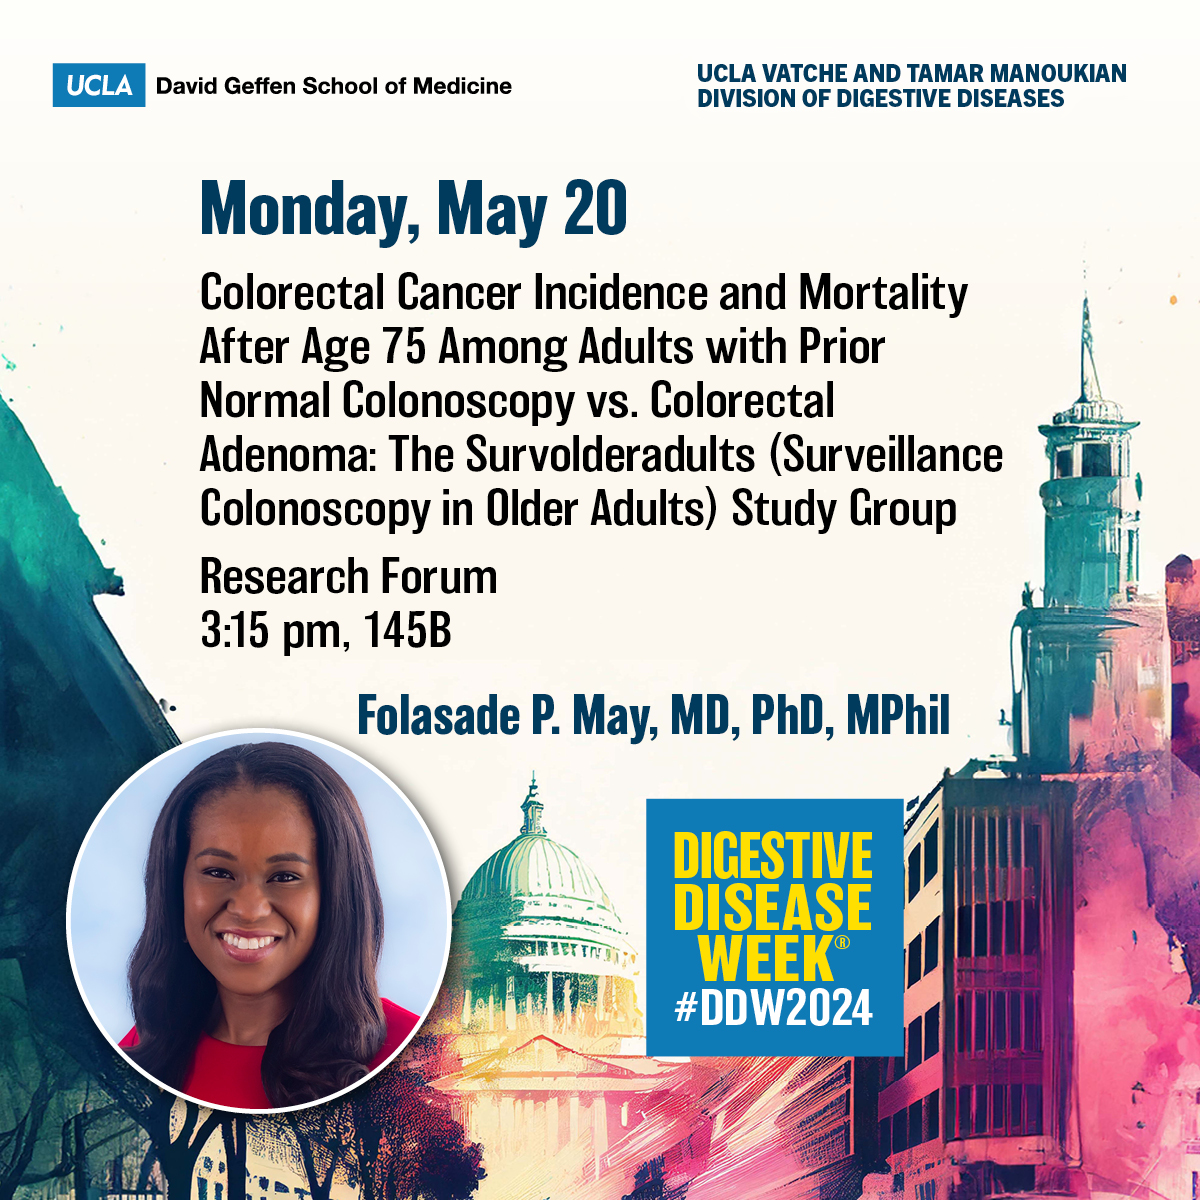 #DDW2024 Research Forum!

#CRC Incidence and Mortality After Age 75 Among Adults with Prior Normal Colonoscopy vs. Colorectal Adenoma: The Survolderadults (Surveillance Colonoscopy in Older Adults) Study Group

🙌Dr. Fola May (@drfolamay #MayLabUCLA)
➡️May 20, 3:15 pm, 145B